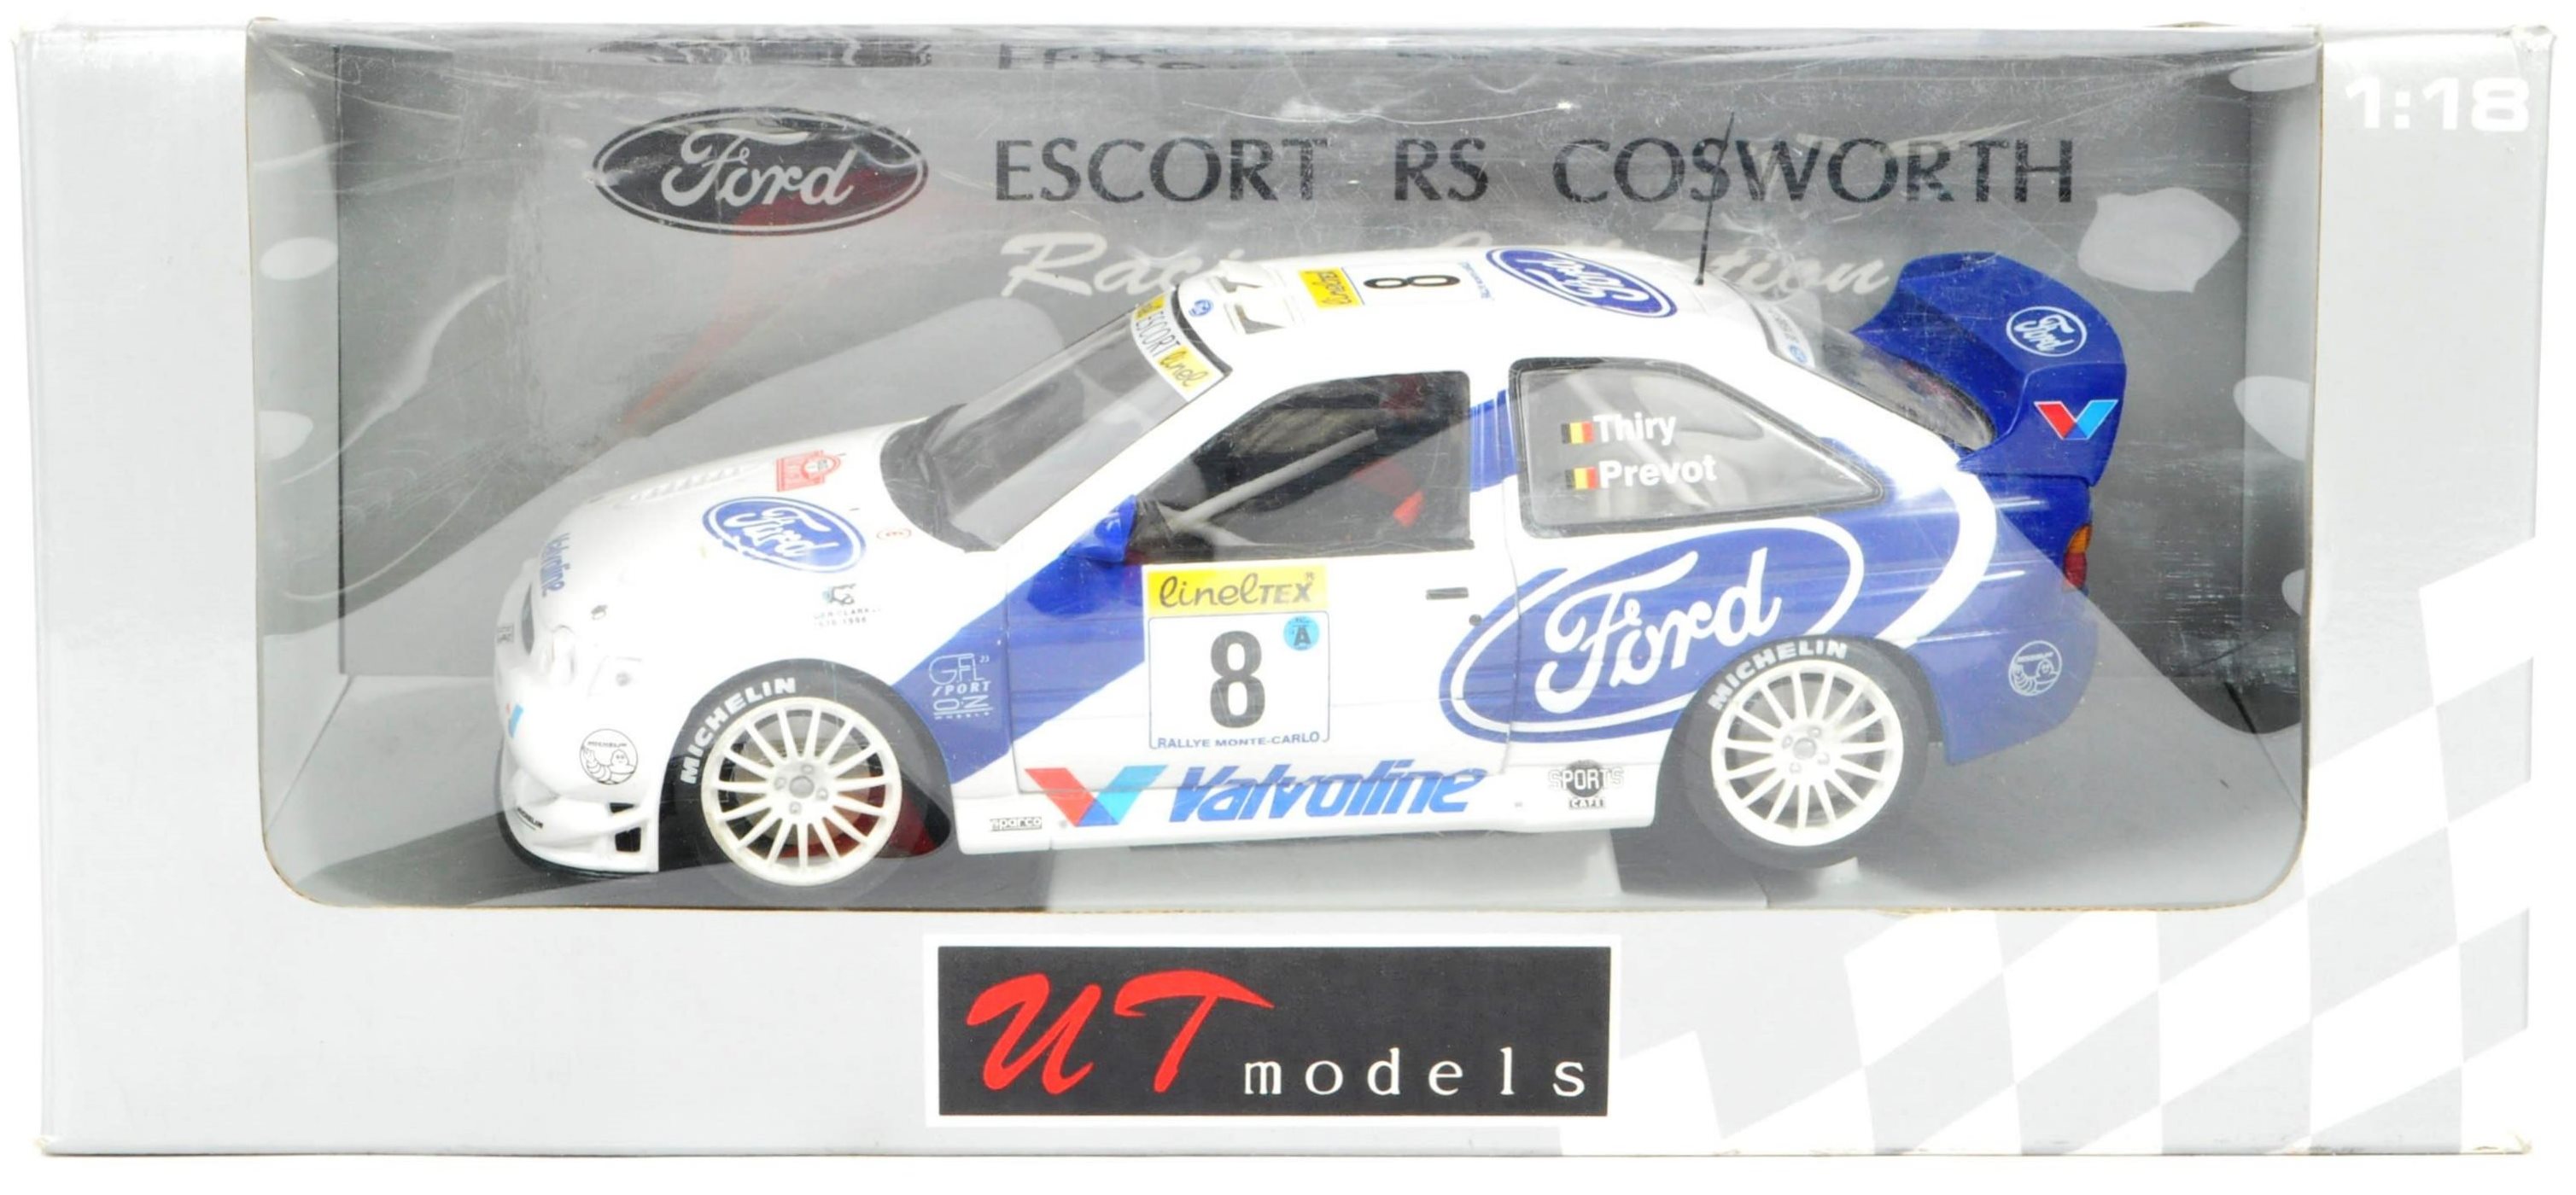 UT MODELS 1/18 SCALE PRECISION DIECAST FORD ESCORT RALLY CAR